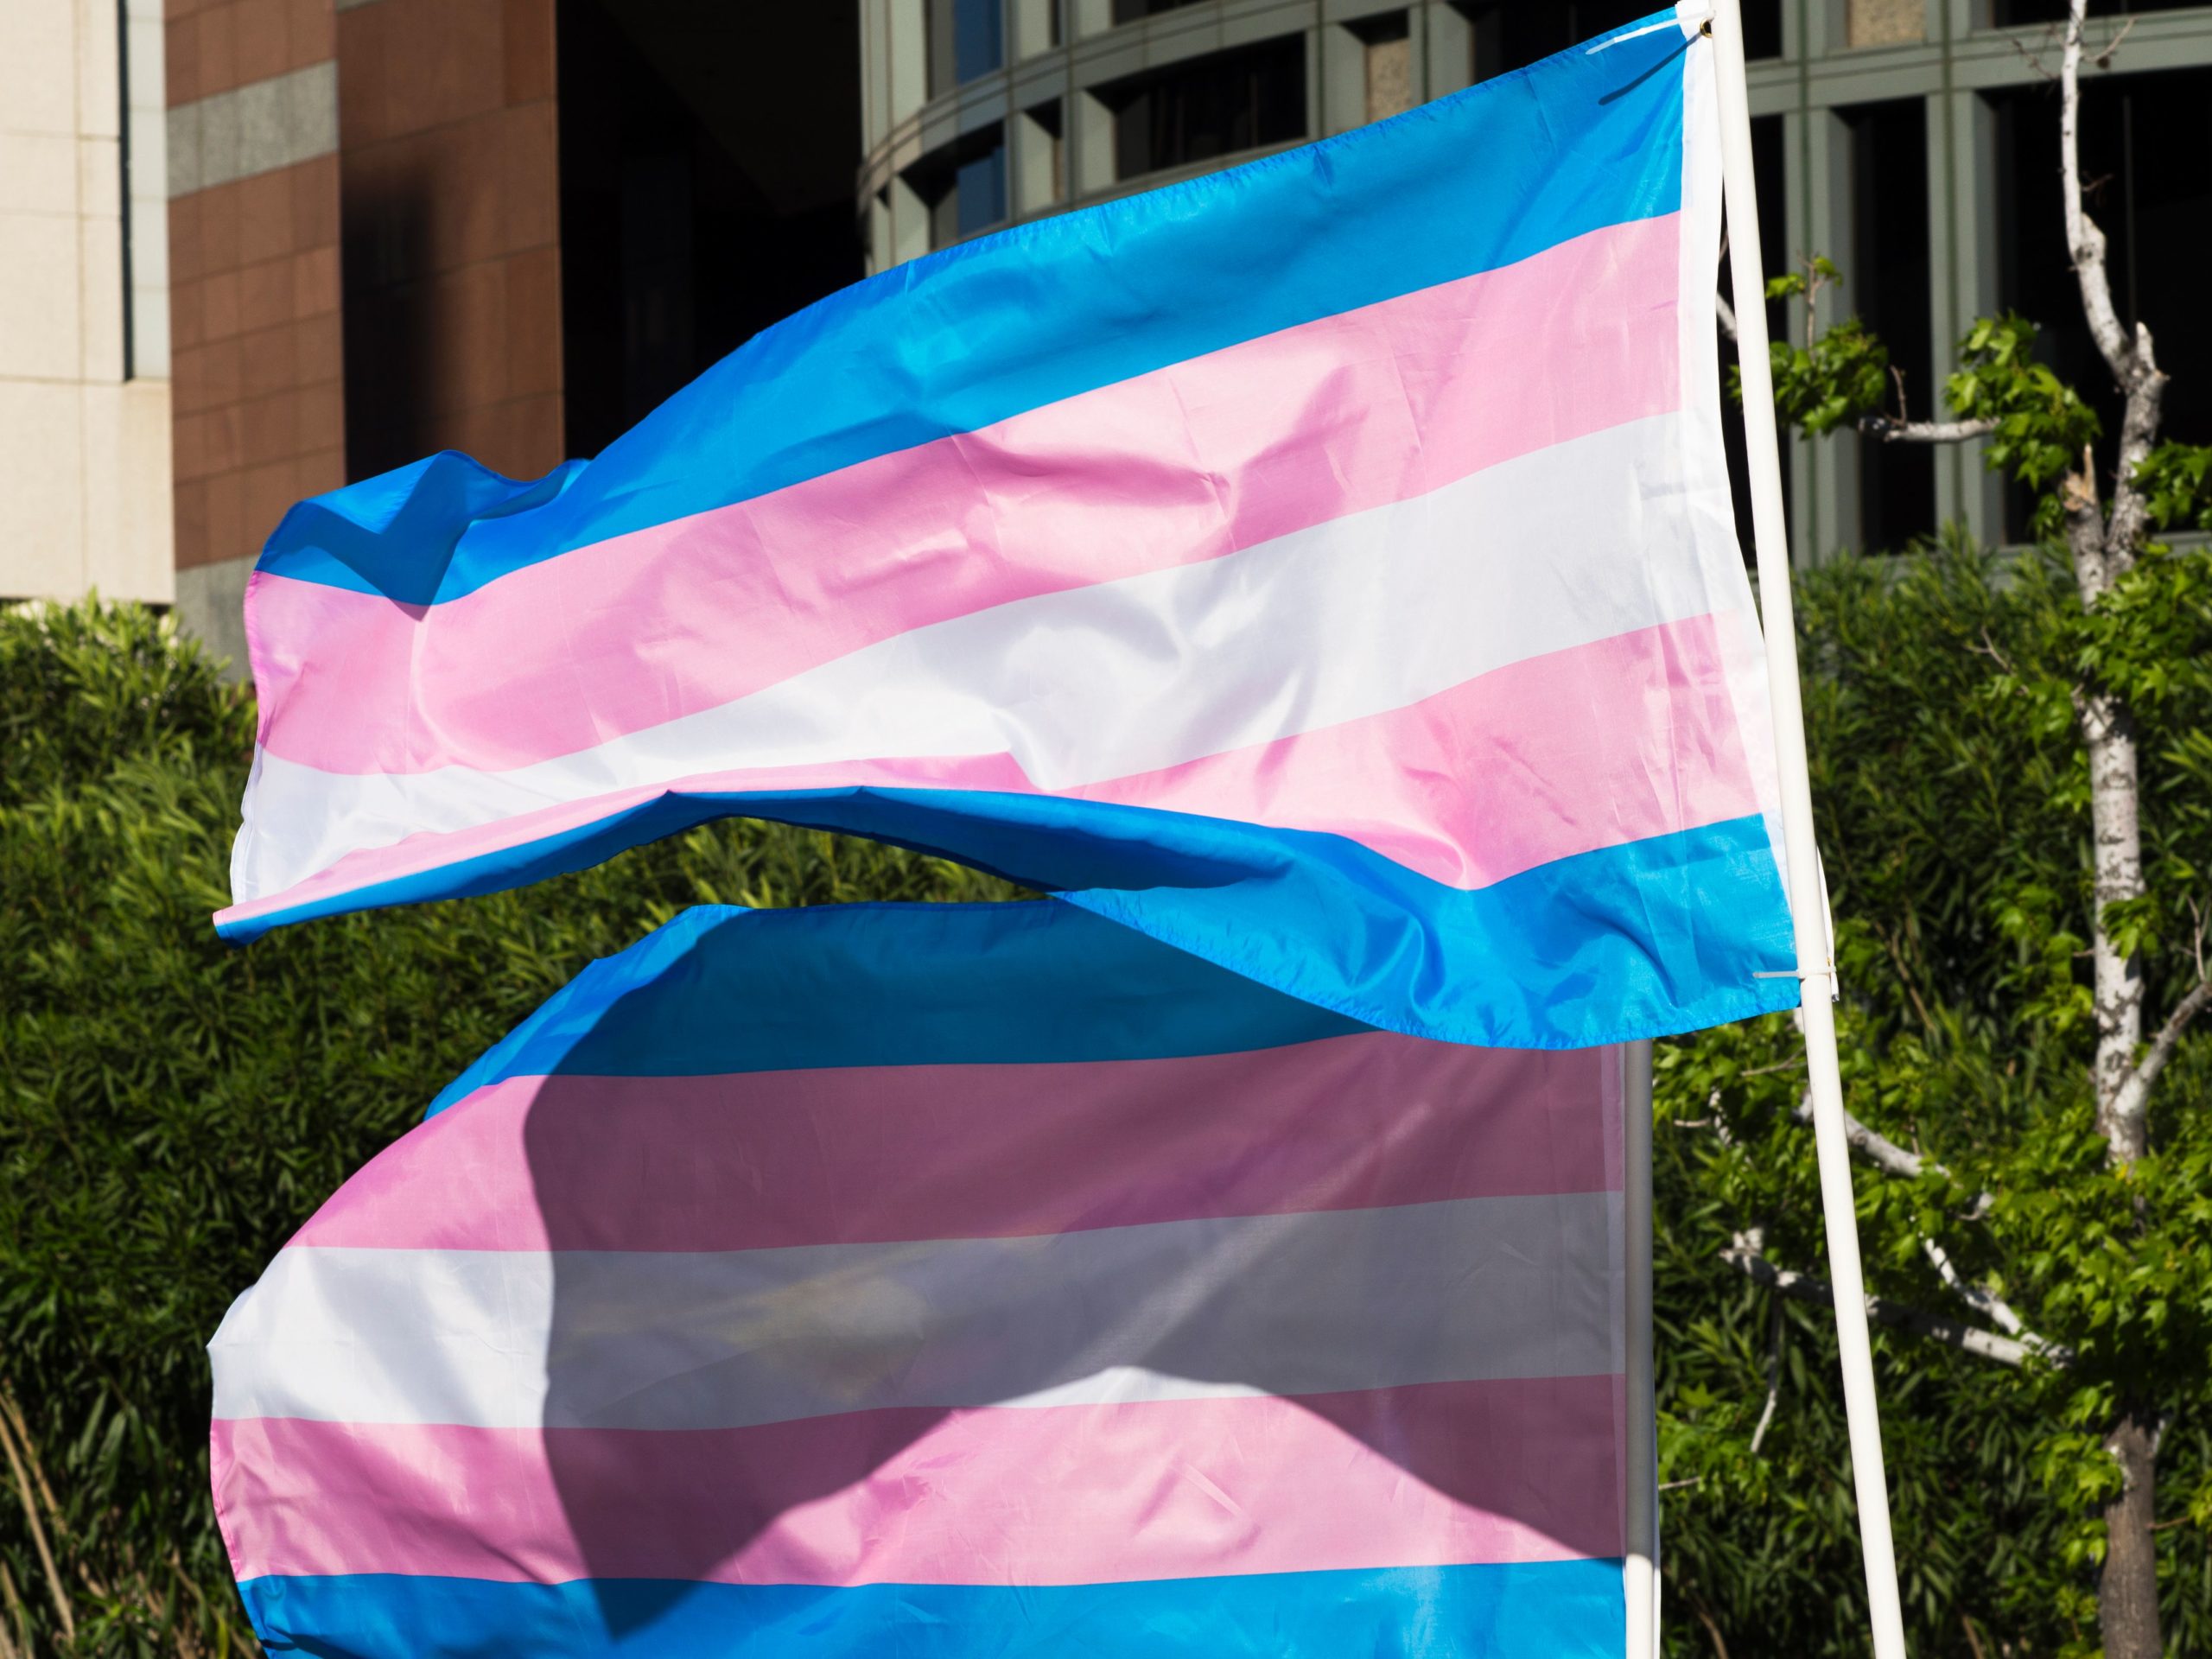 Trans pride flags flutter in the wind at a gathering to celebrate International Transgender Day of Visibility, March 31, 2017 at the Edward R. Roybal Federal Building in Los Angeles, California. 